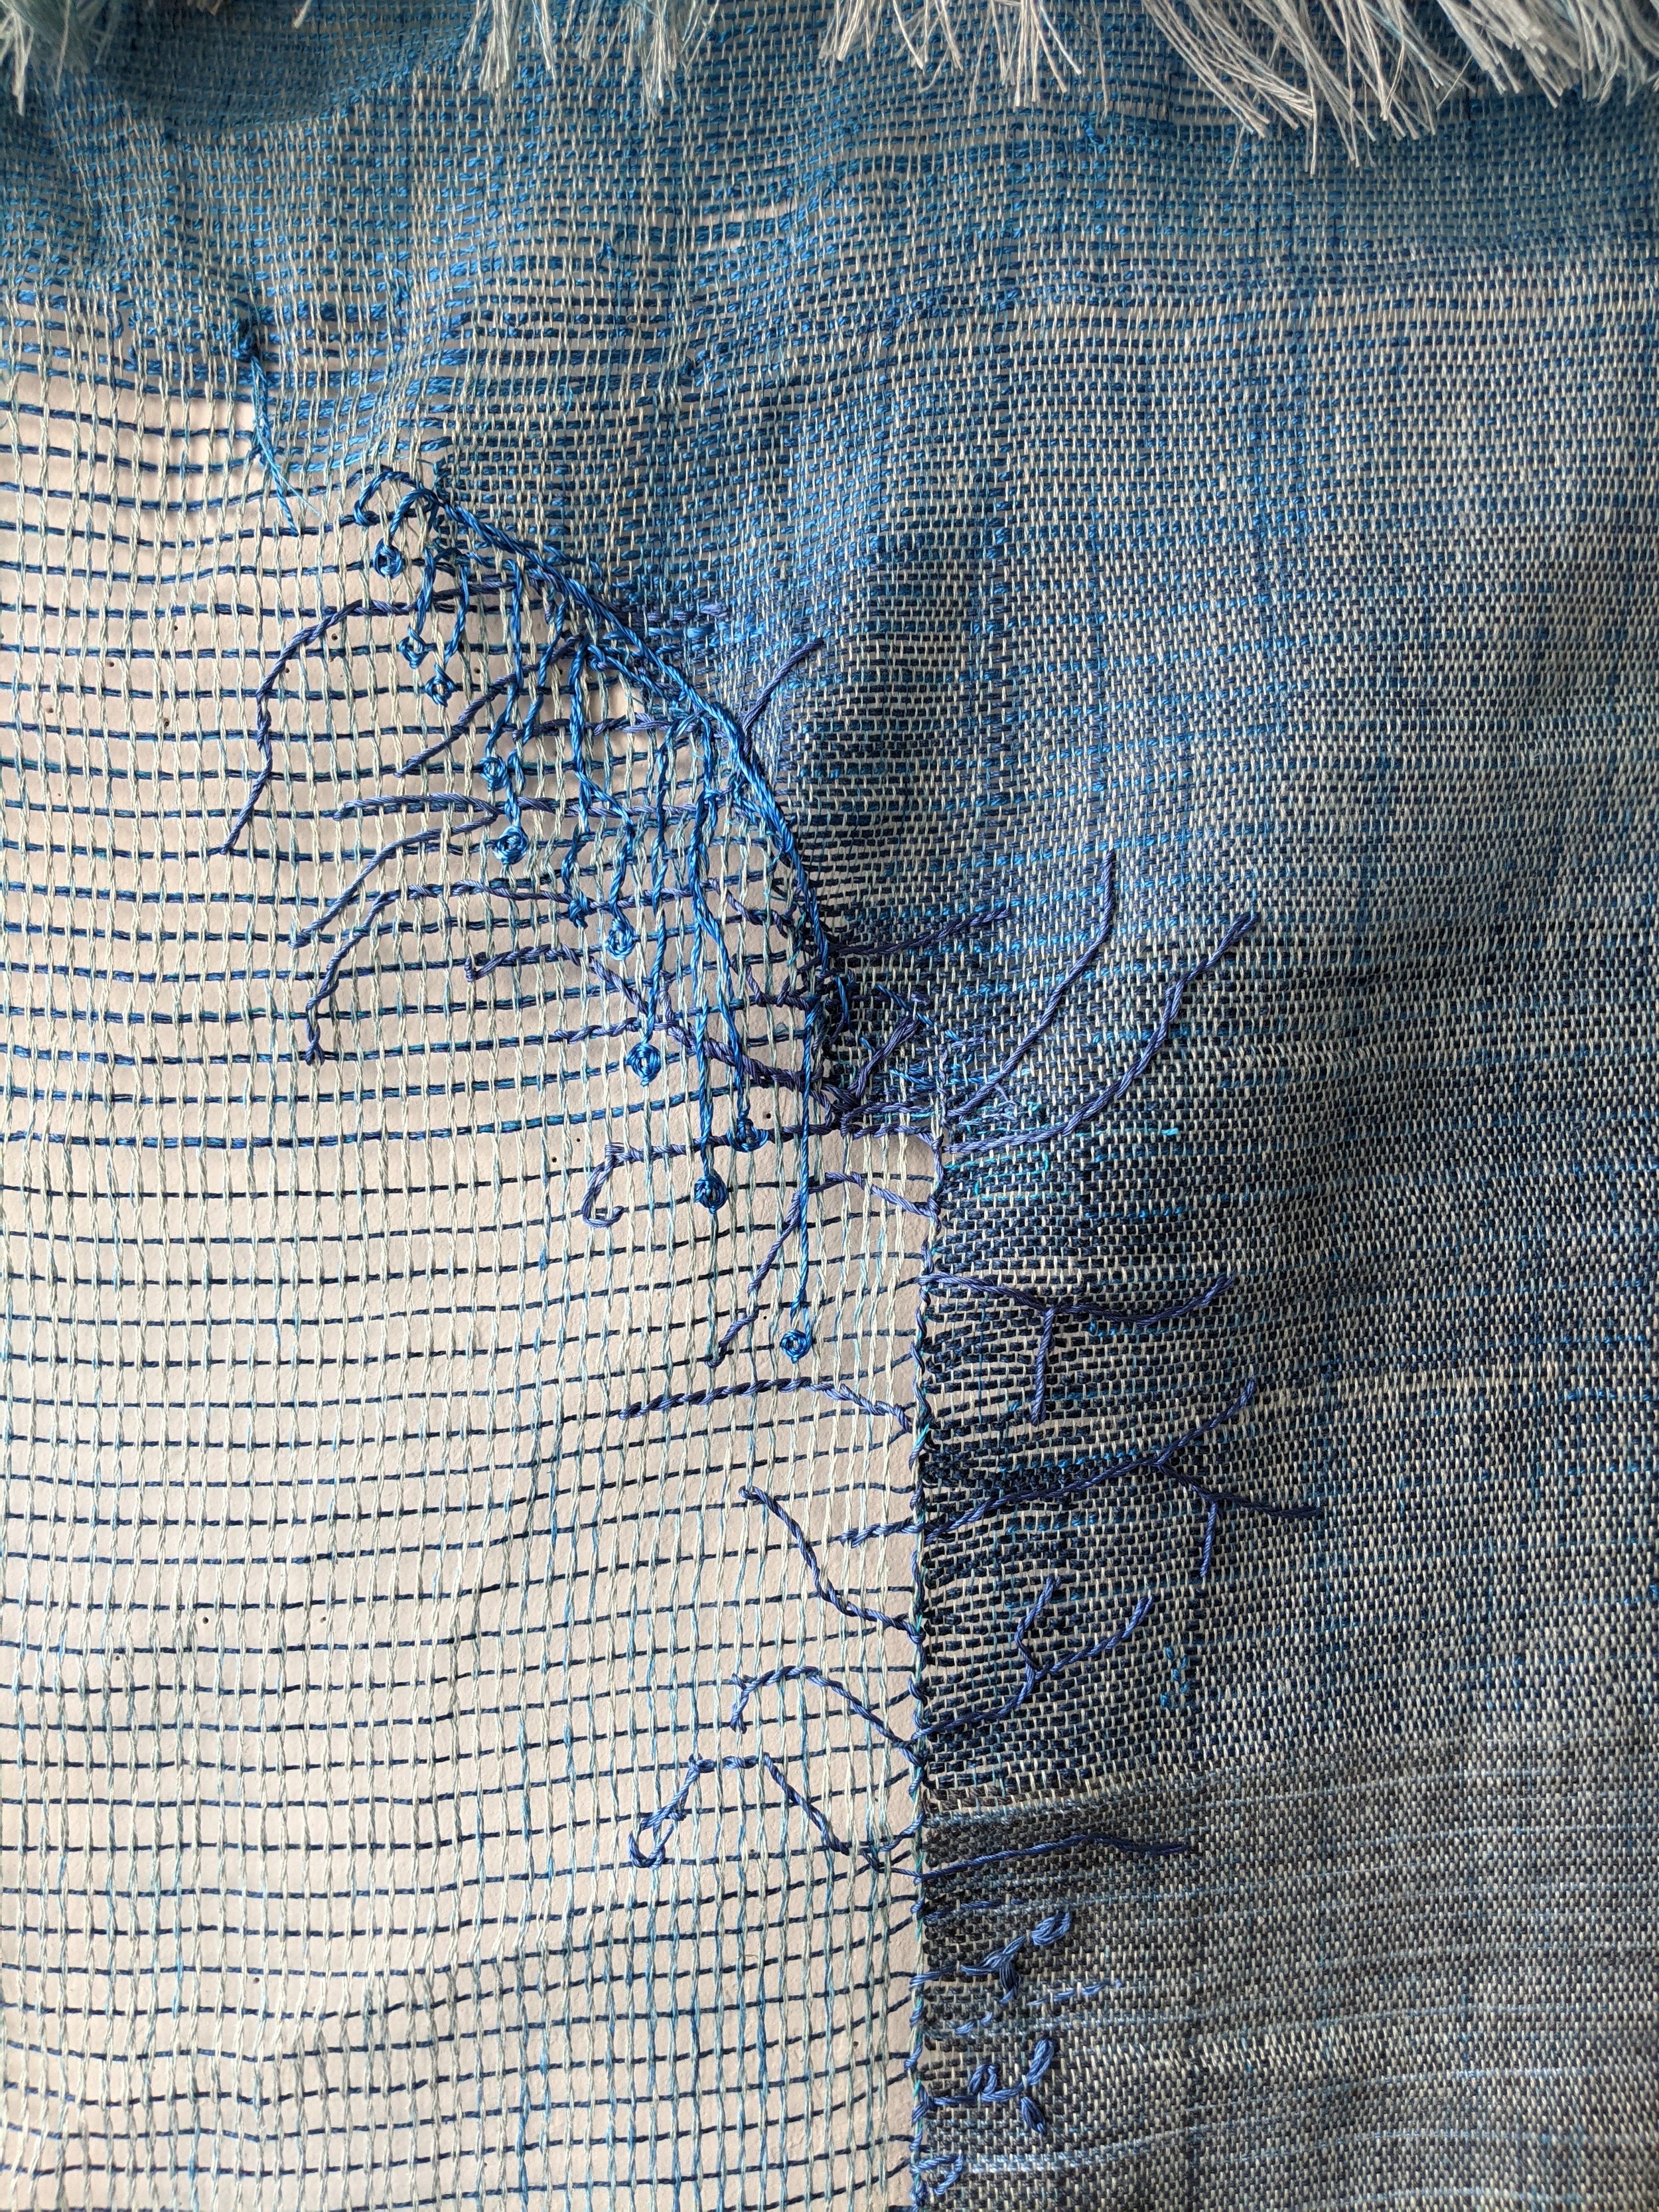  blue tower [detail] hand woven gauze; painted linen, cotton, and silk. 54 in x 34 in 2021 